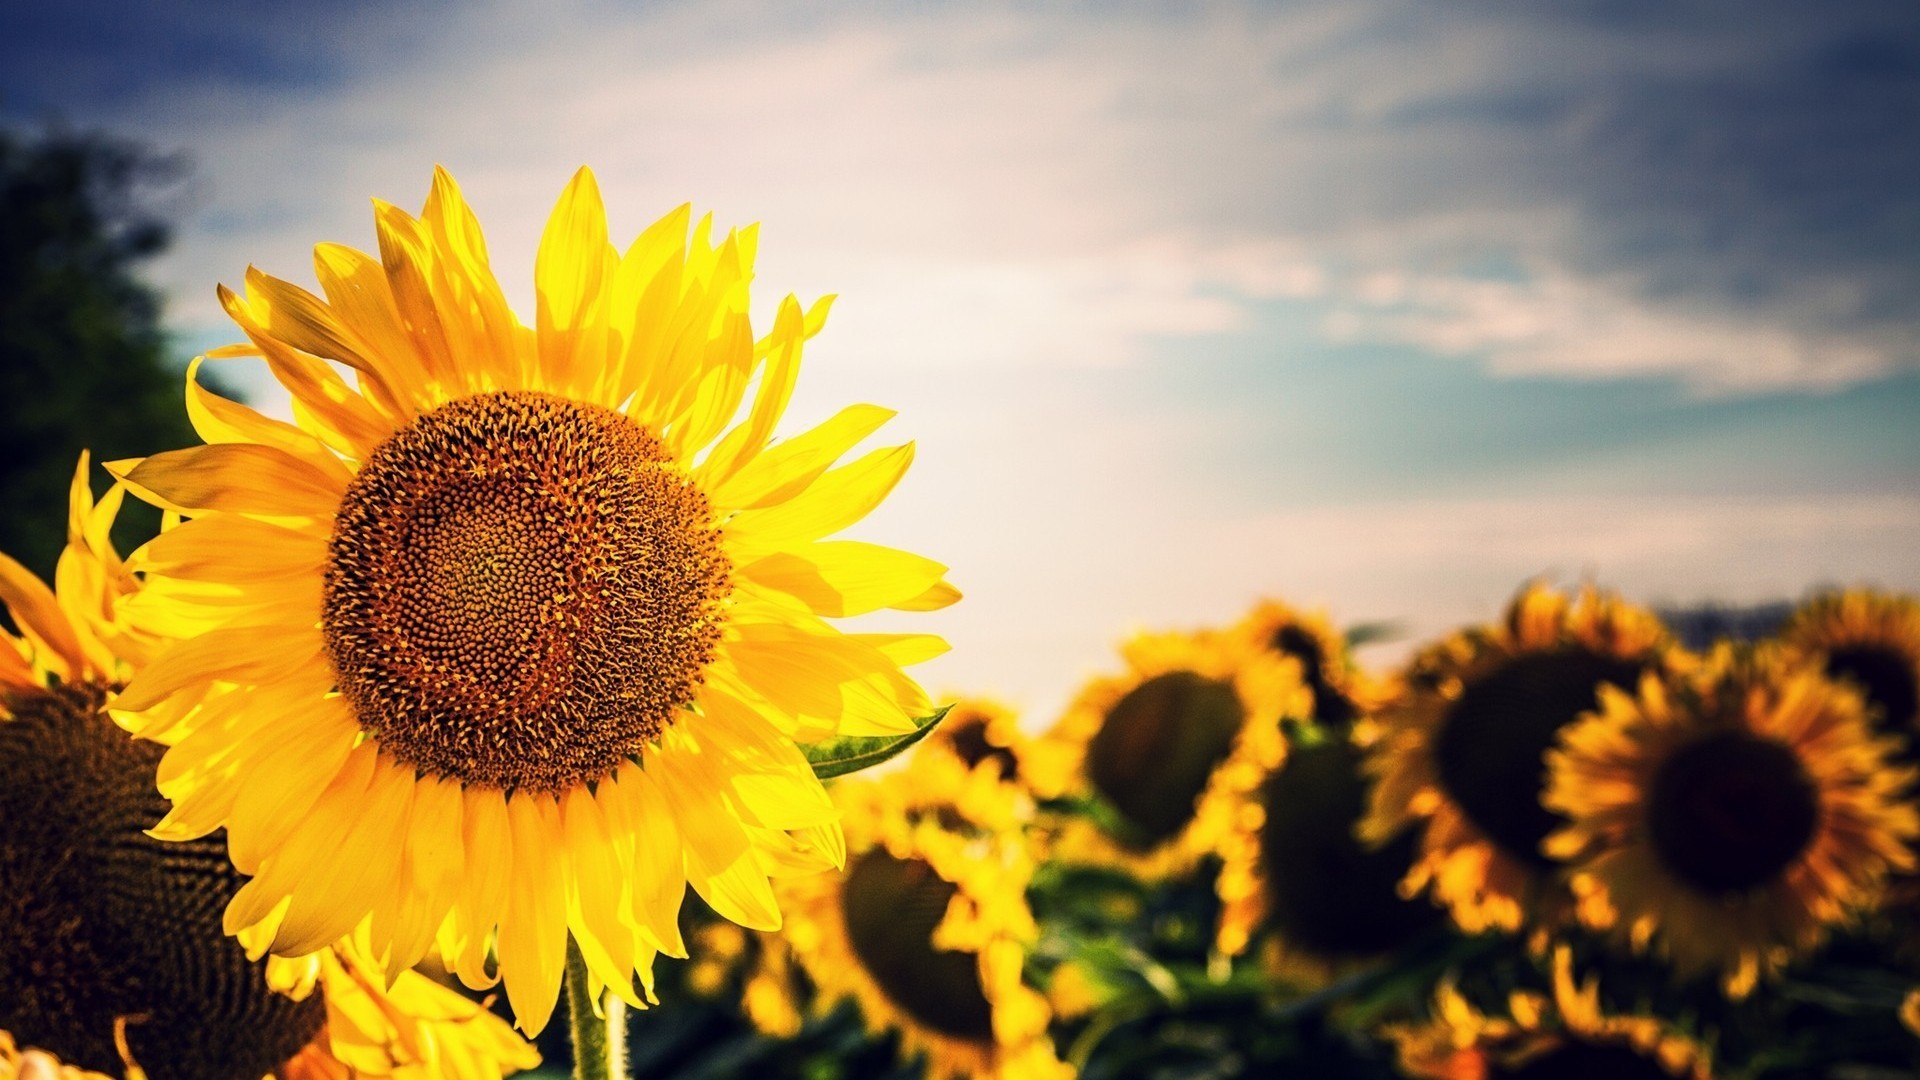 1920x1080 ... Sunflower Background Wallpapers WIN10 THEMES ...